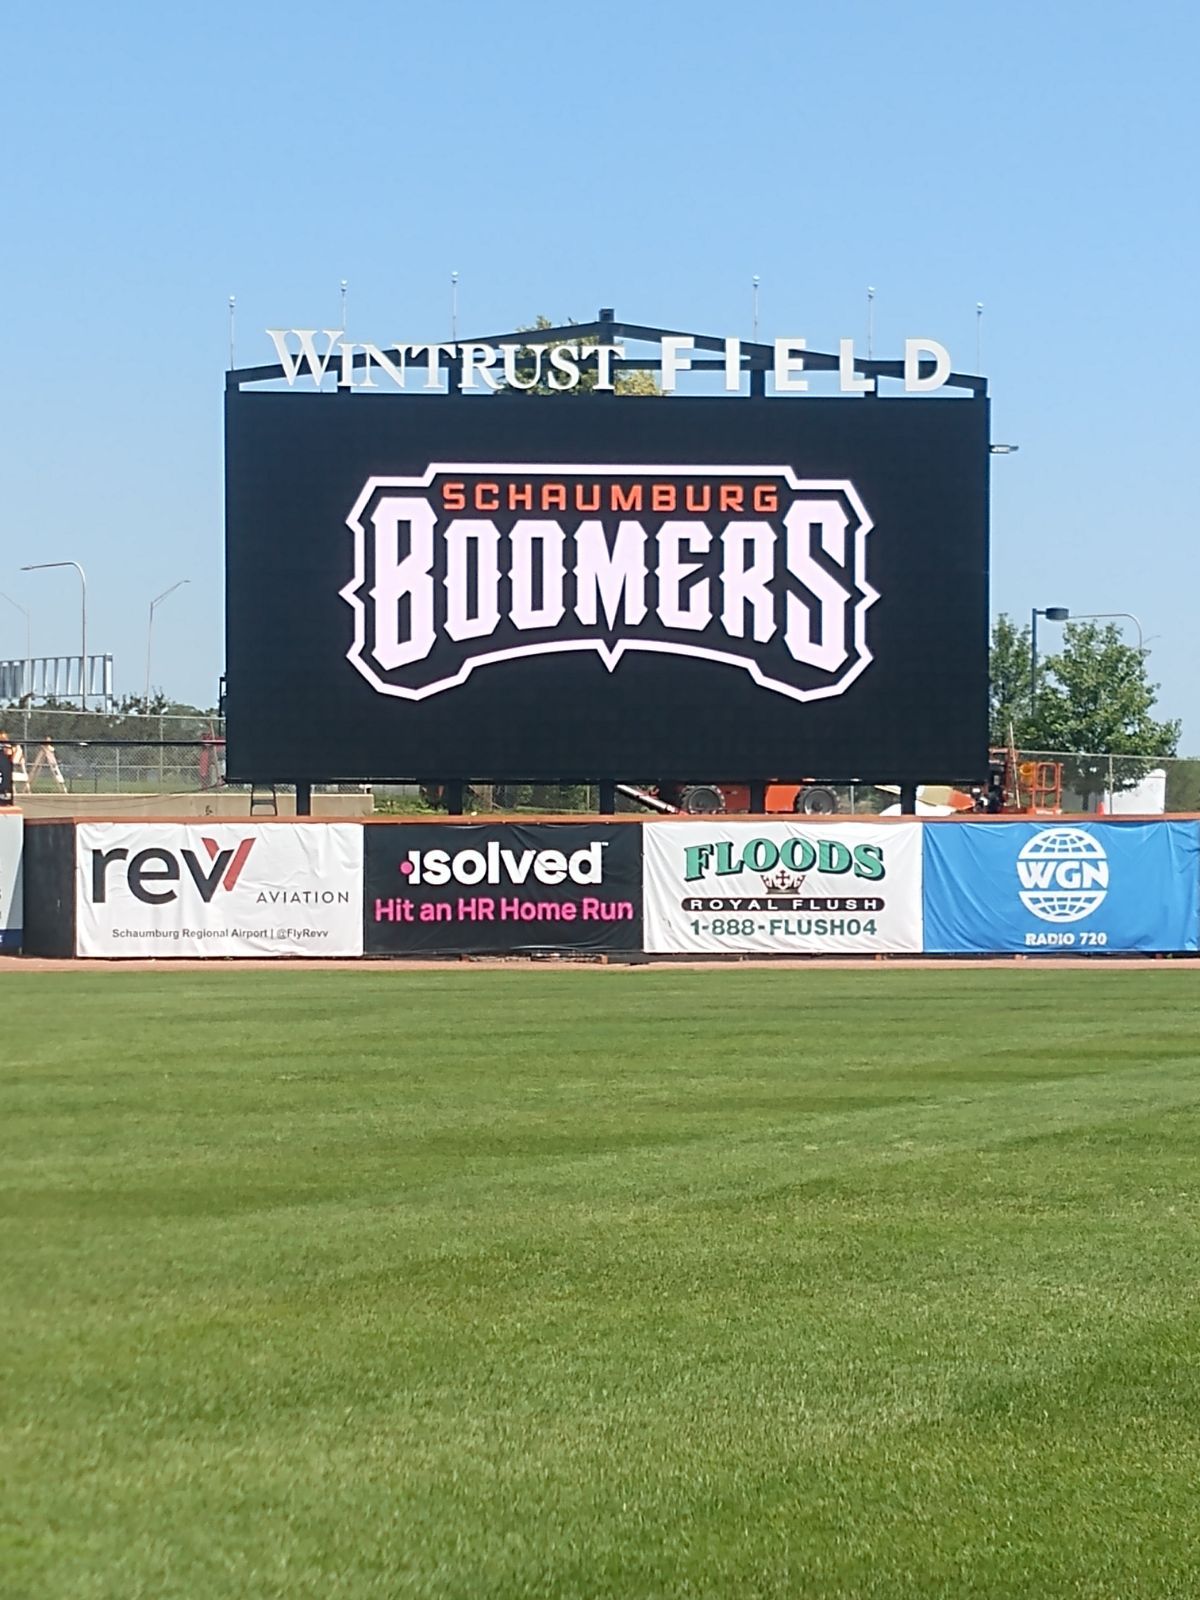 Pulse Technology Gives Hometown Team Schaumburg Boomers a Major Upgrade with a New Video Wall at Wintrust Field